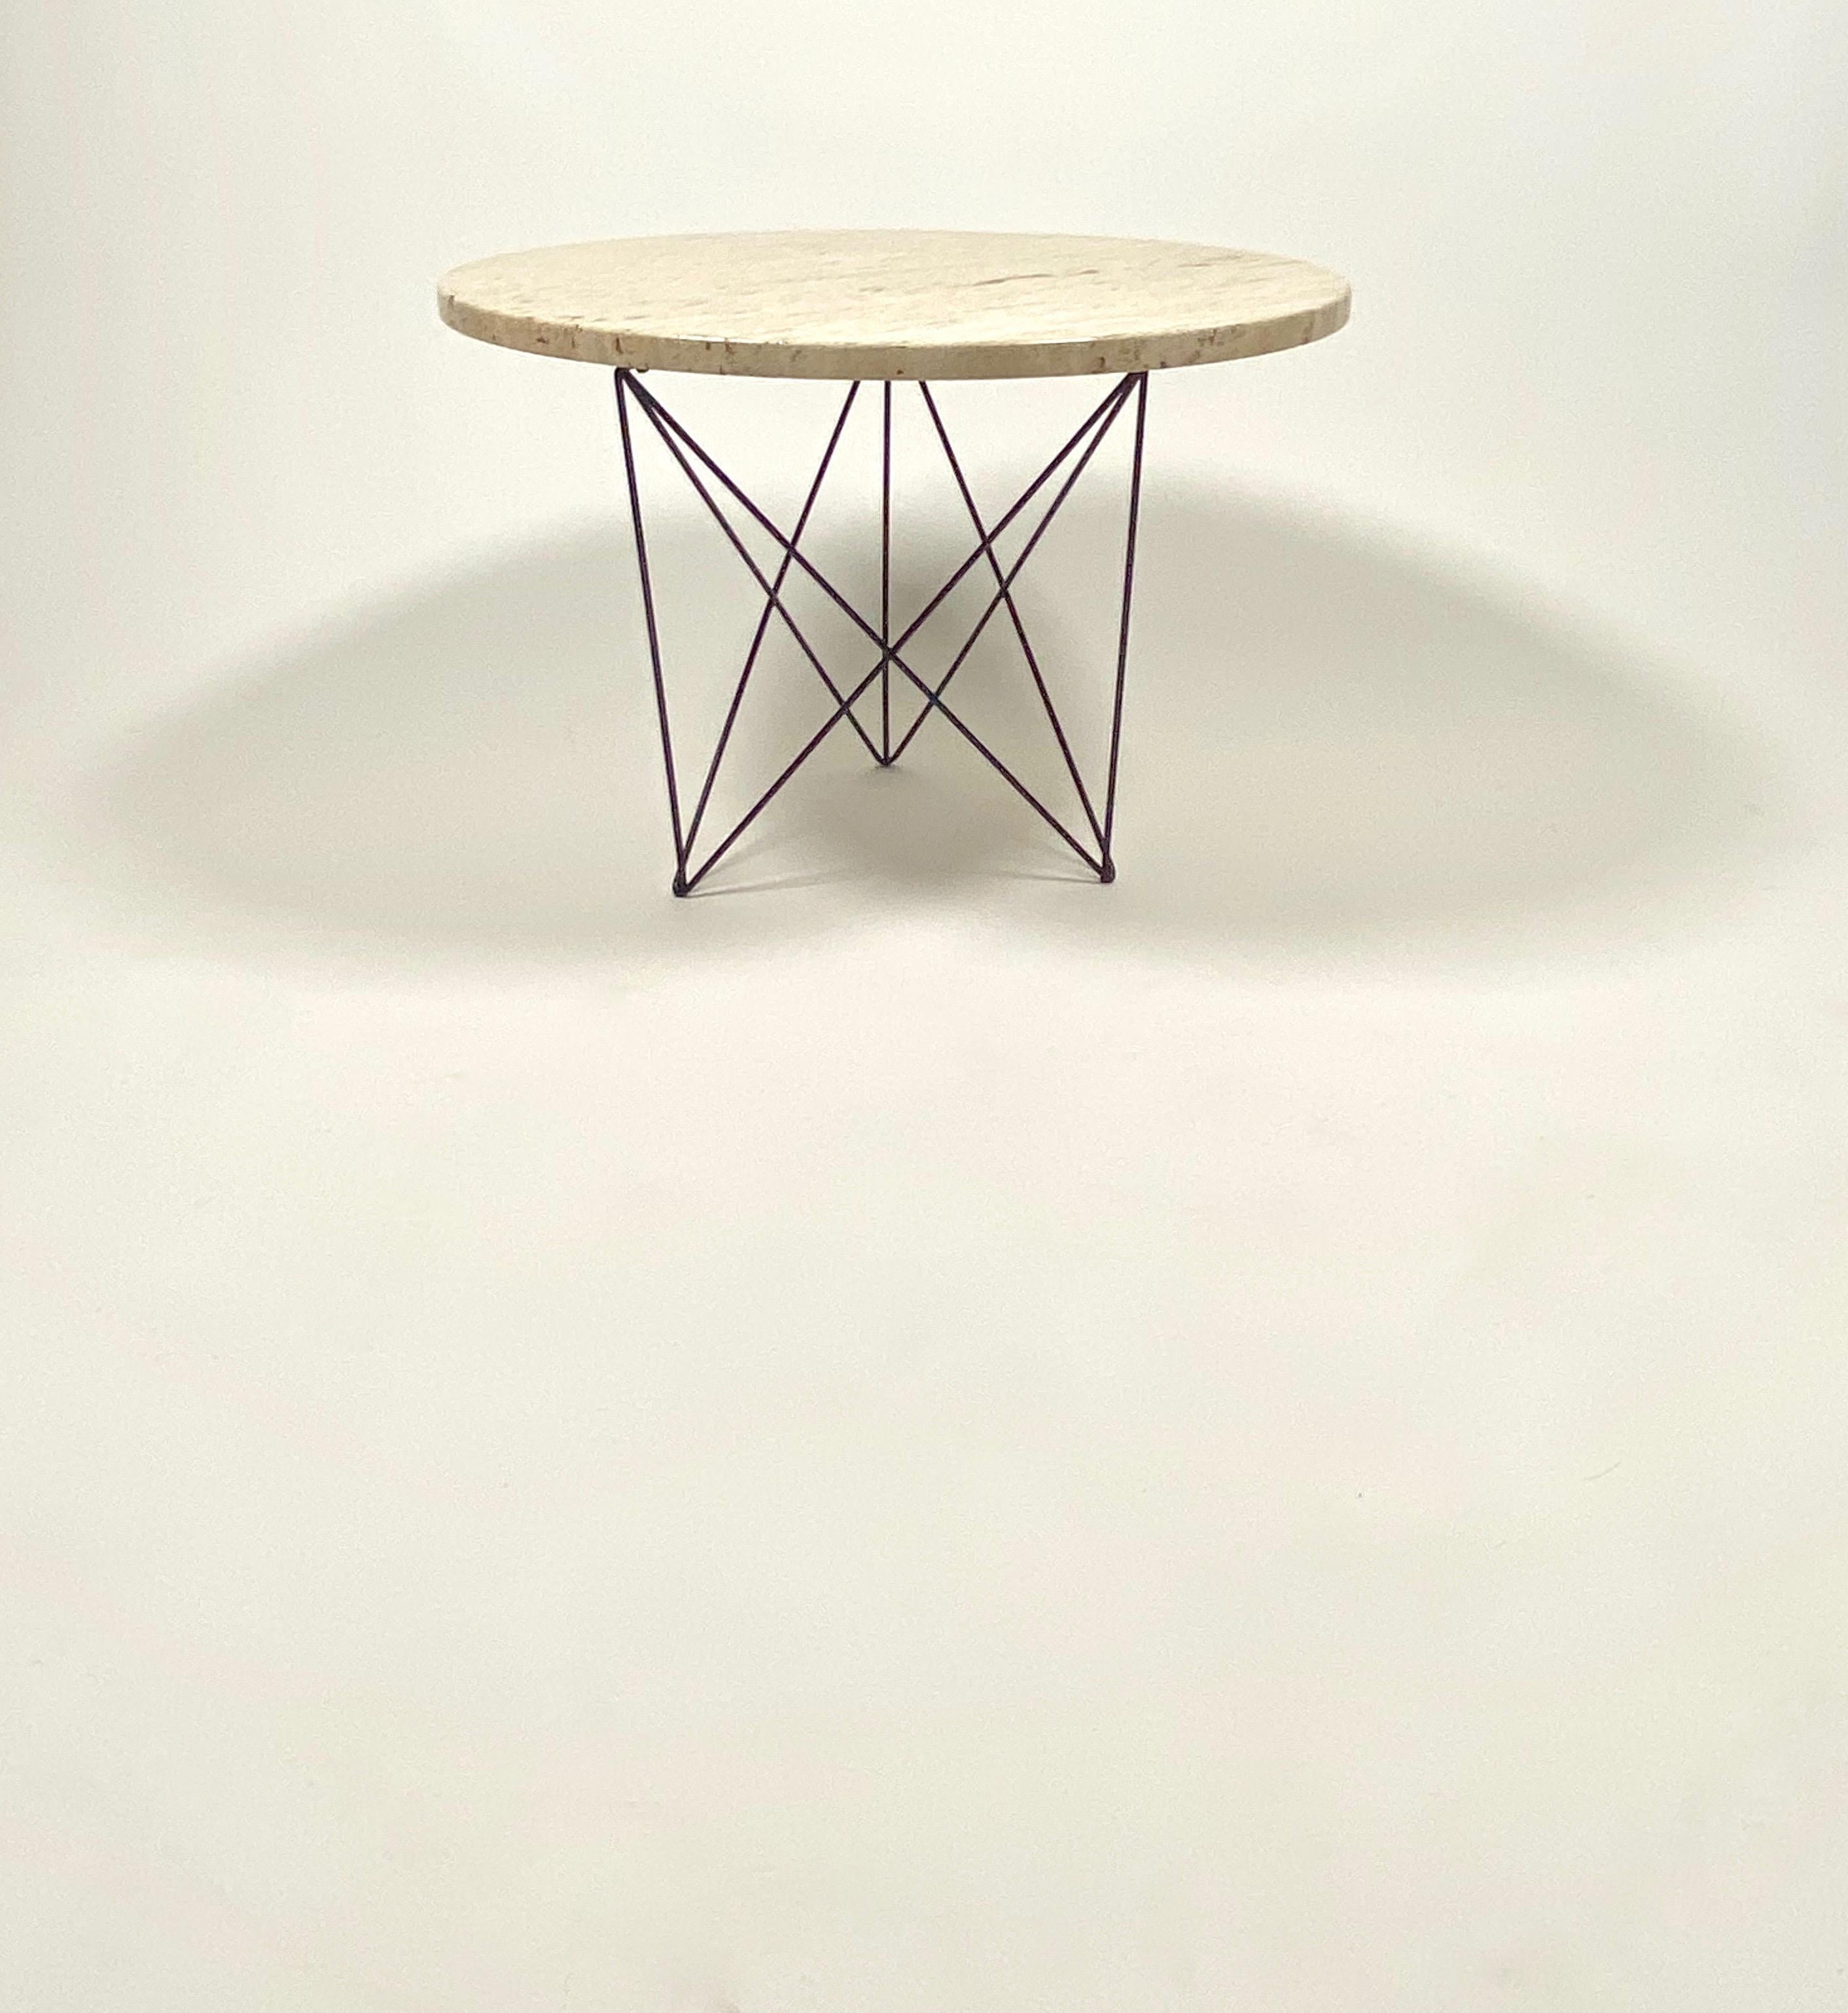 Hand-Crafted 1960s Travertine Side Table w/ Wire Base by Martin Perfit for Rene Brancusi